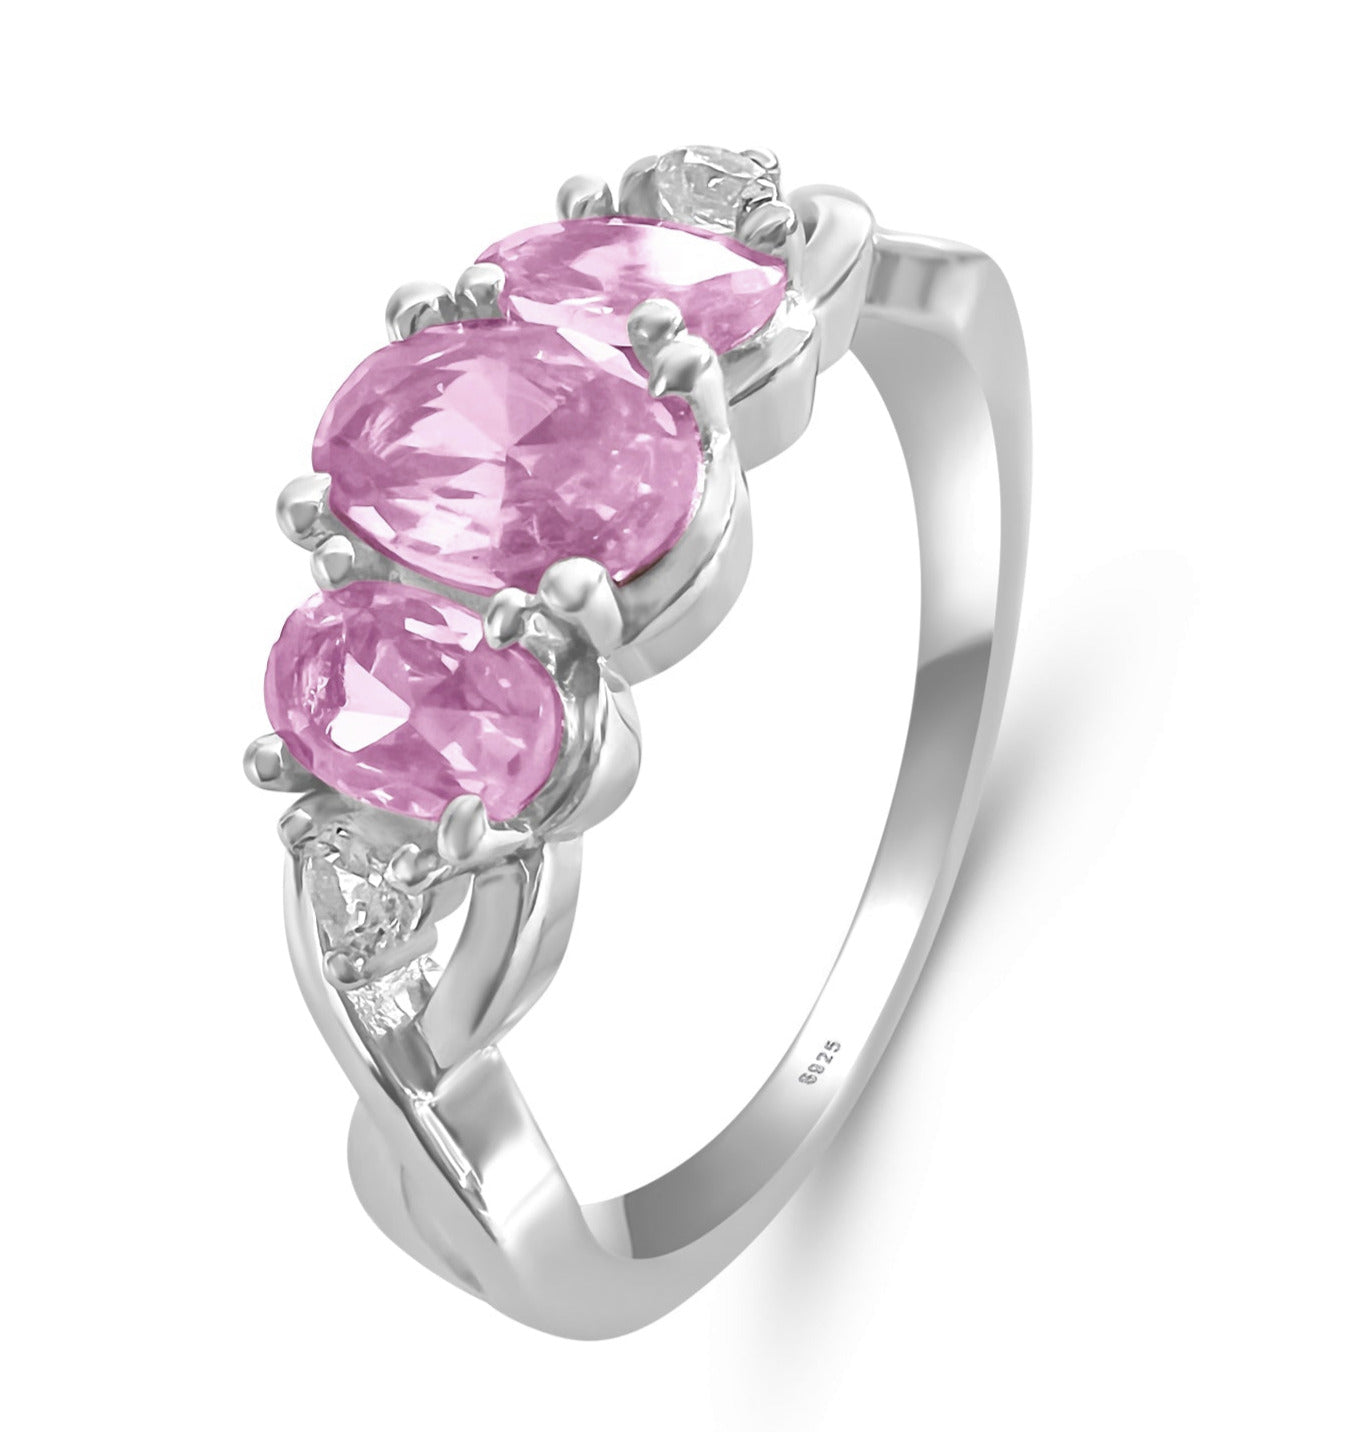 Sterling Silver Triple Oval Pink Cubic Zirconia Ring